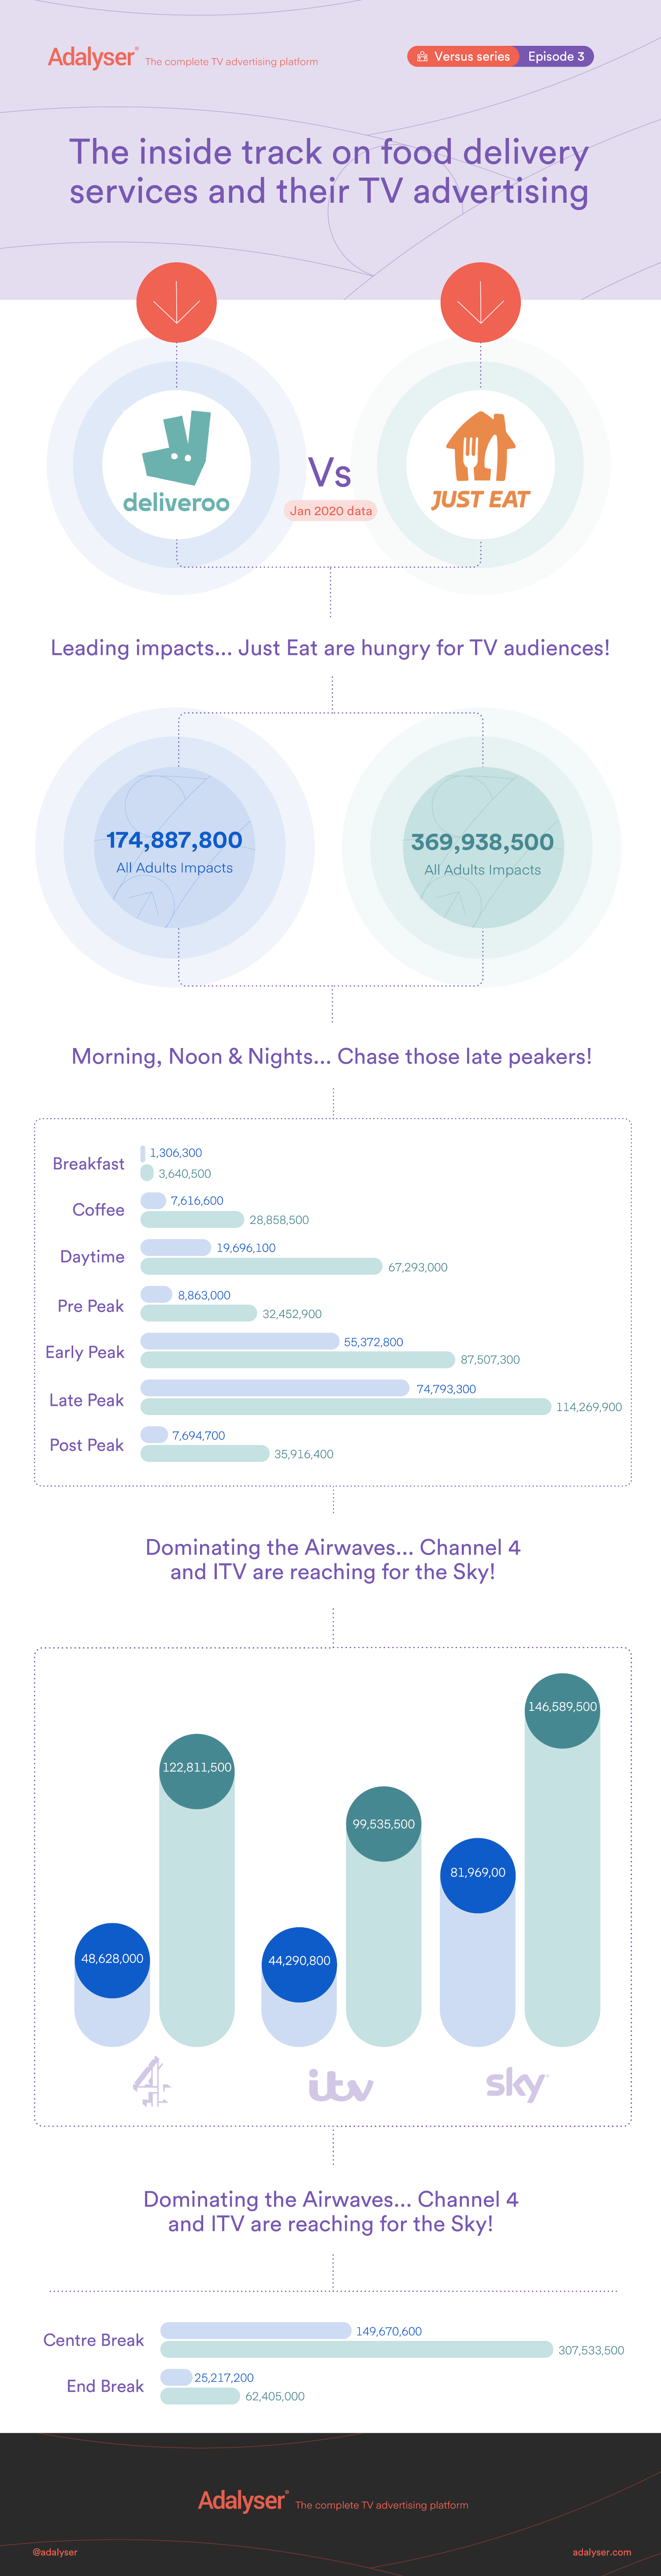 infographic analysing advertising efficiency between just eat and deliveroo